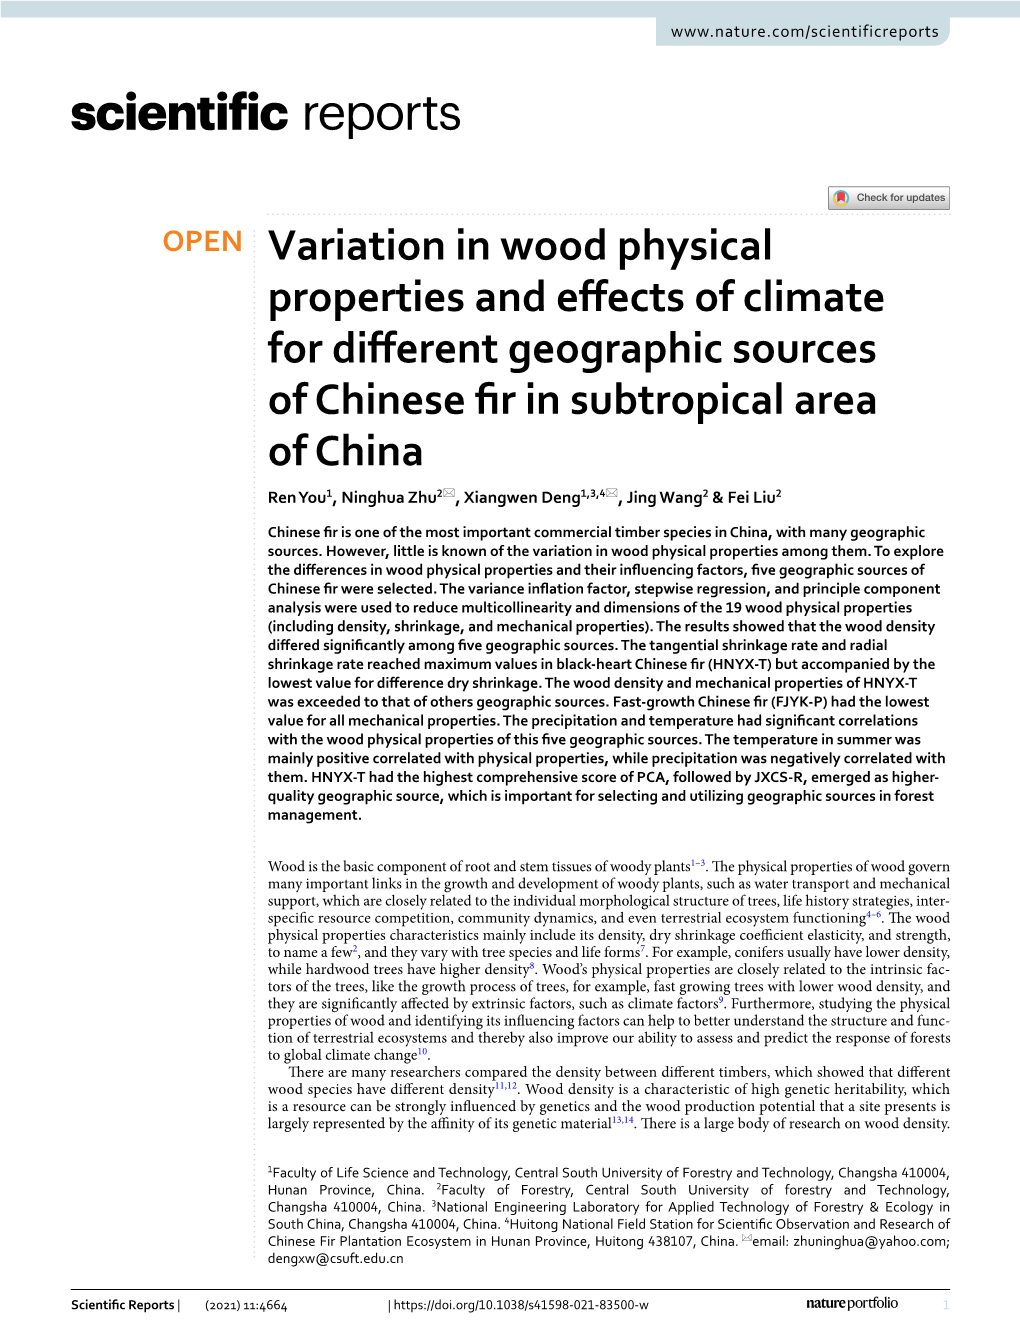 Variation in Wood Physical Properties and Effects of Climate for Different